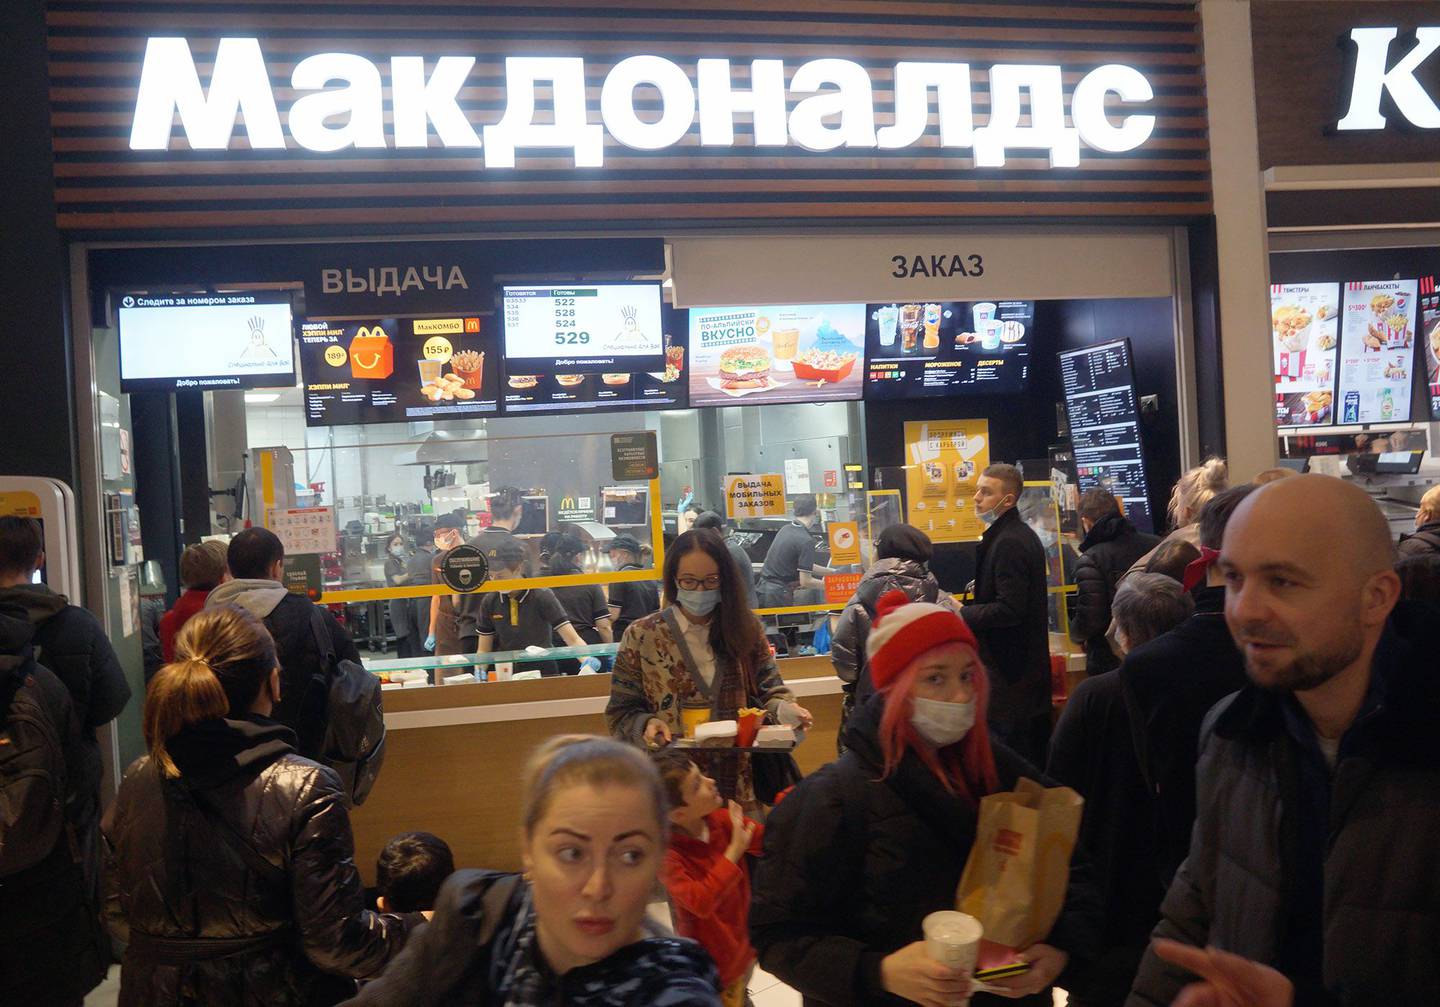 People visit a McDonald's before it closes at the end of the week, in Moscow, on March 9.